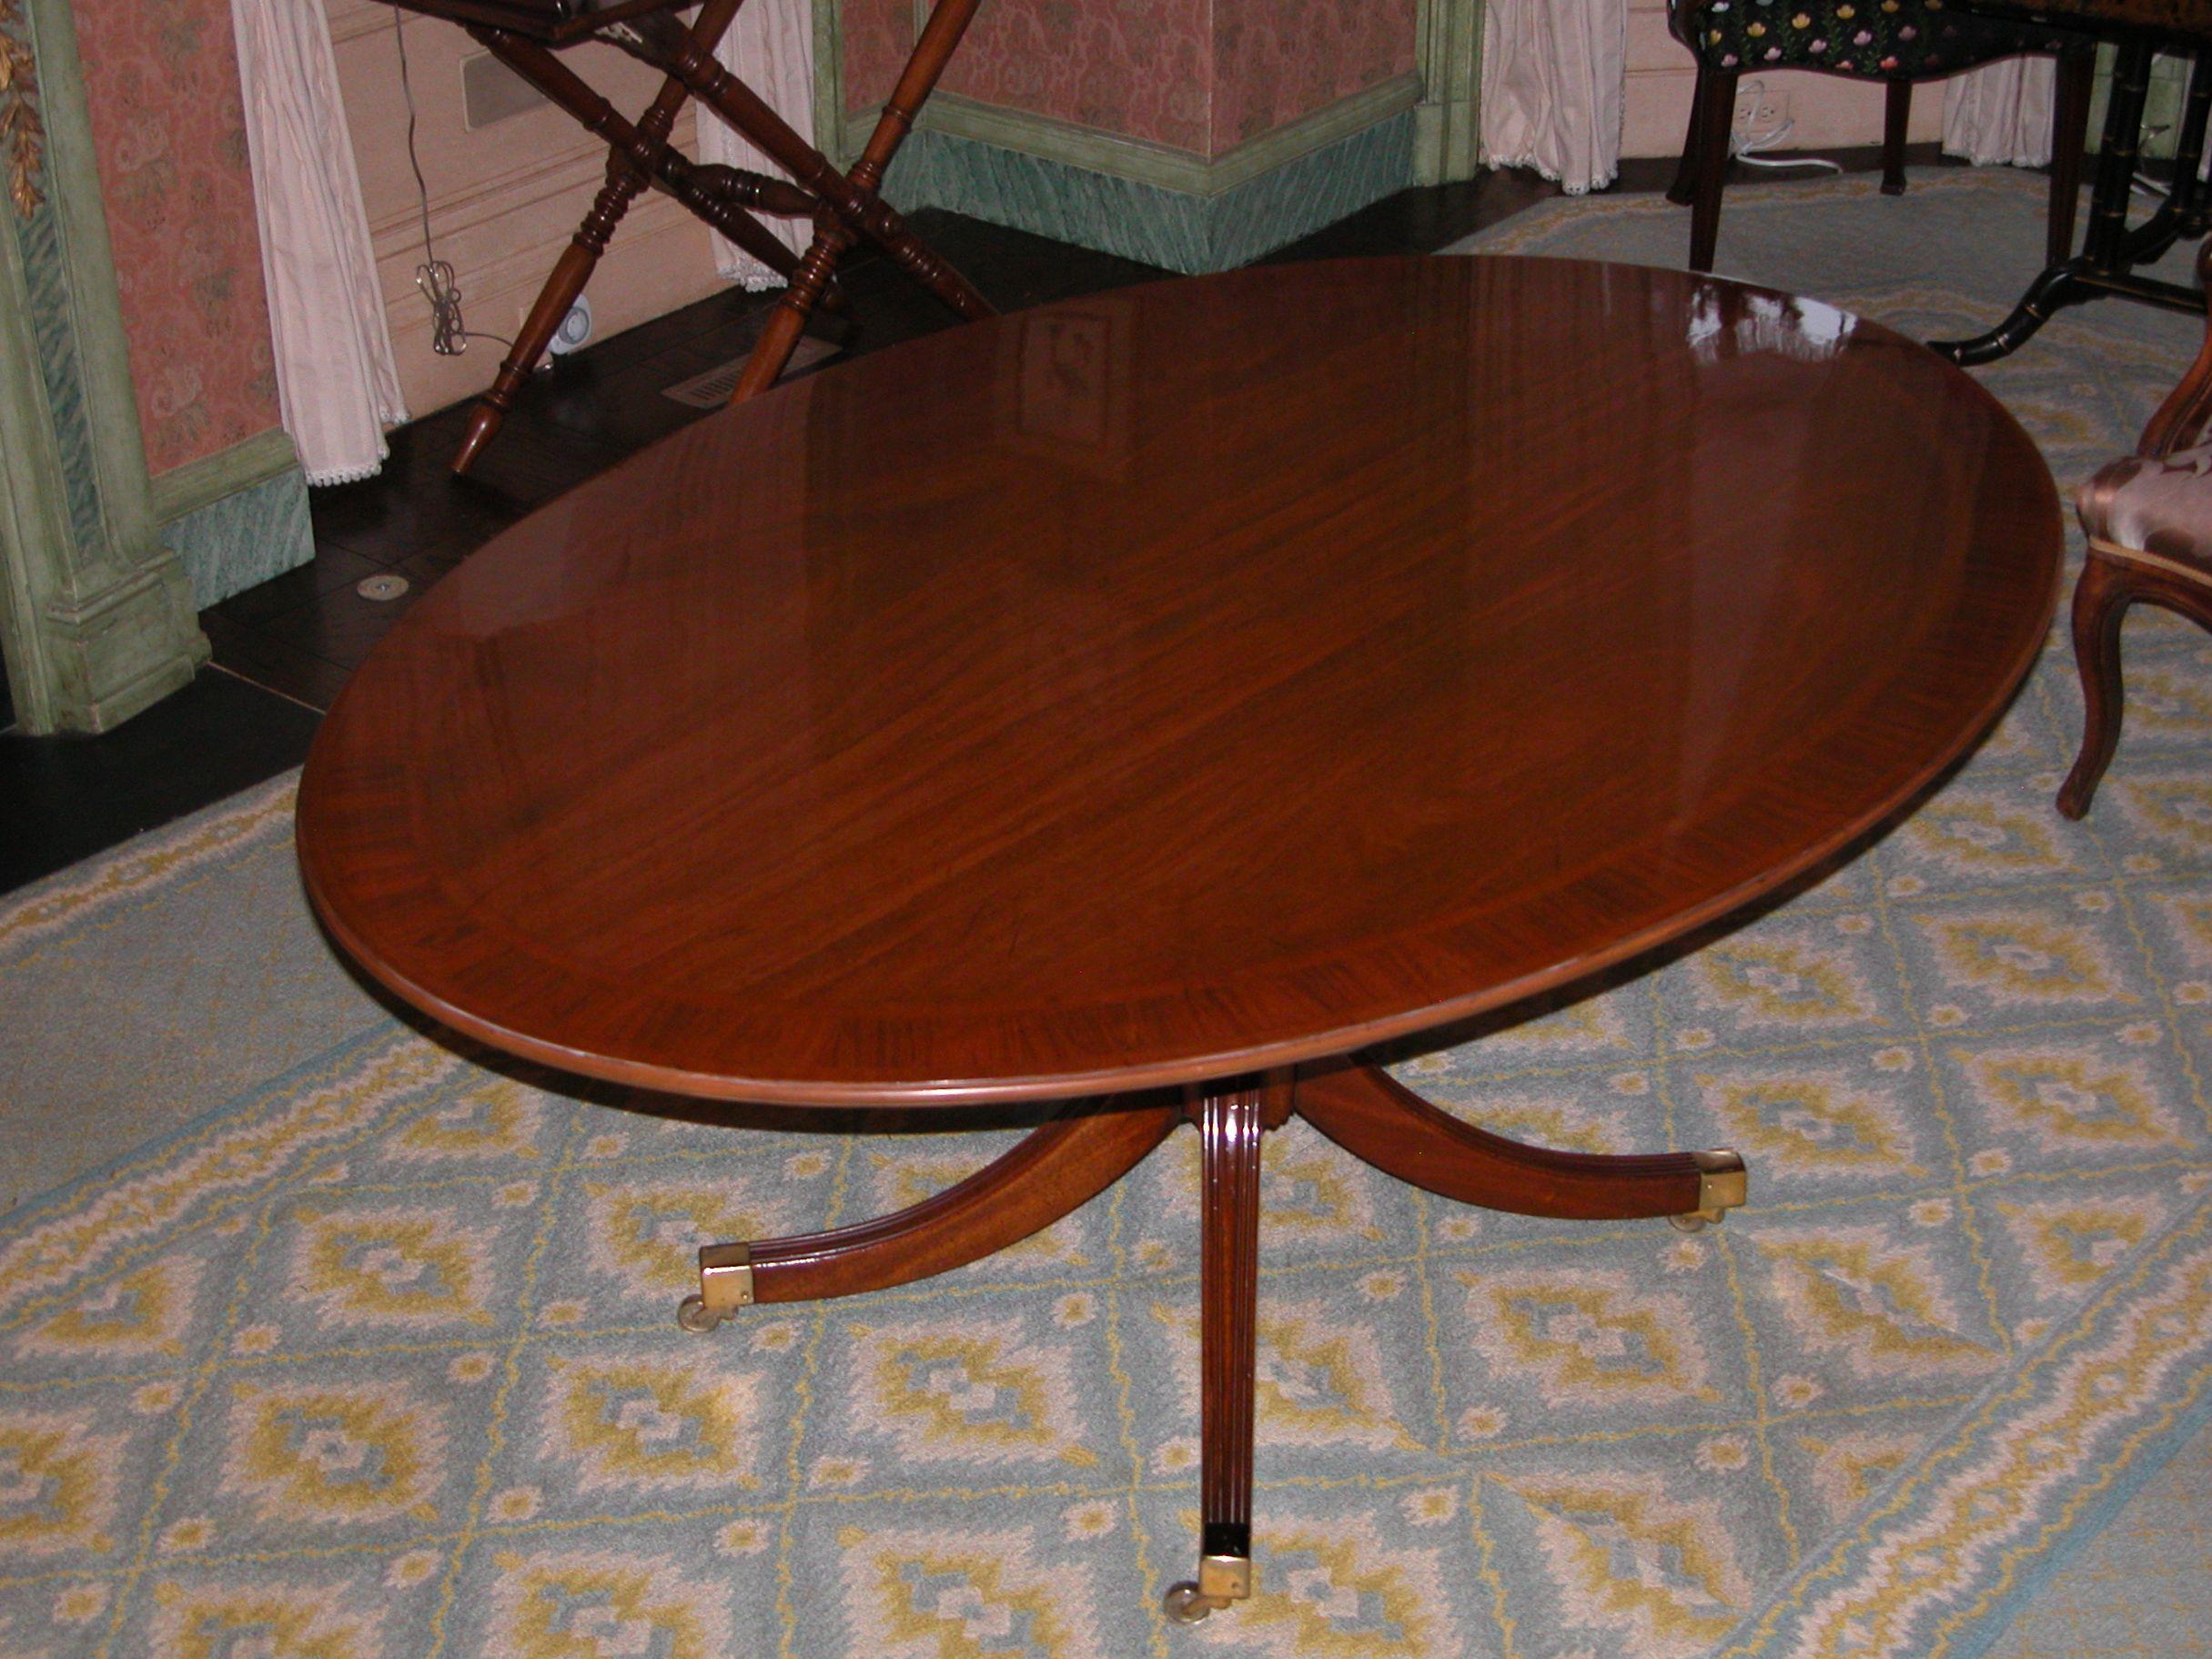 English Made Banded Mahogany Oval Dining Room Table on Single Pedestal